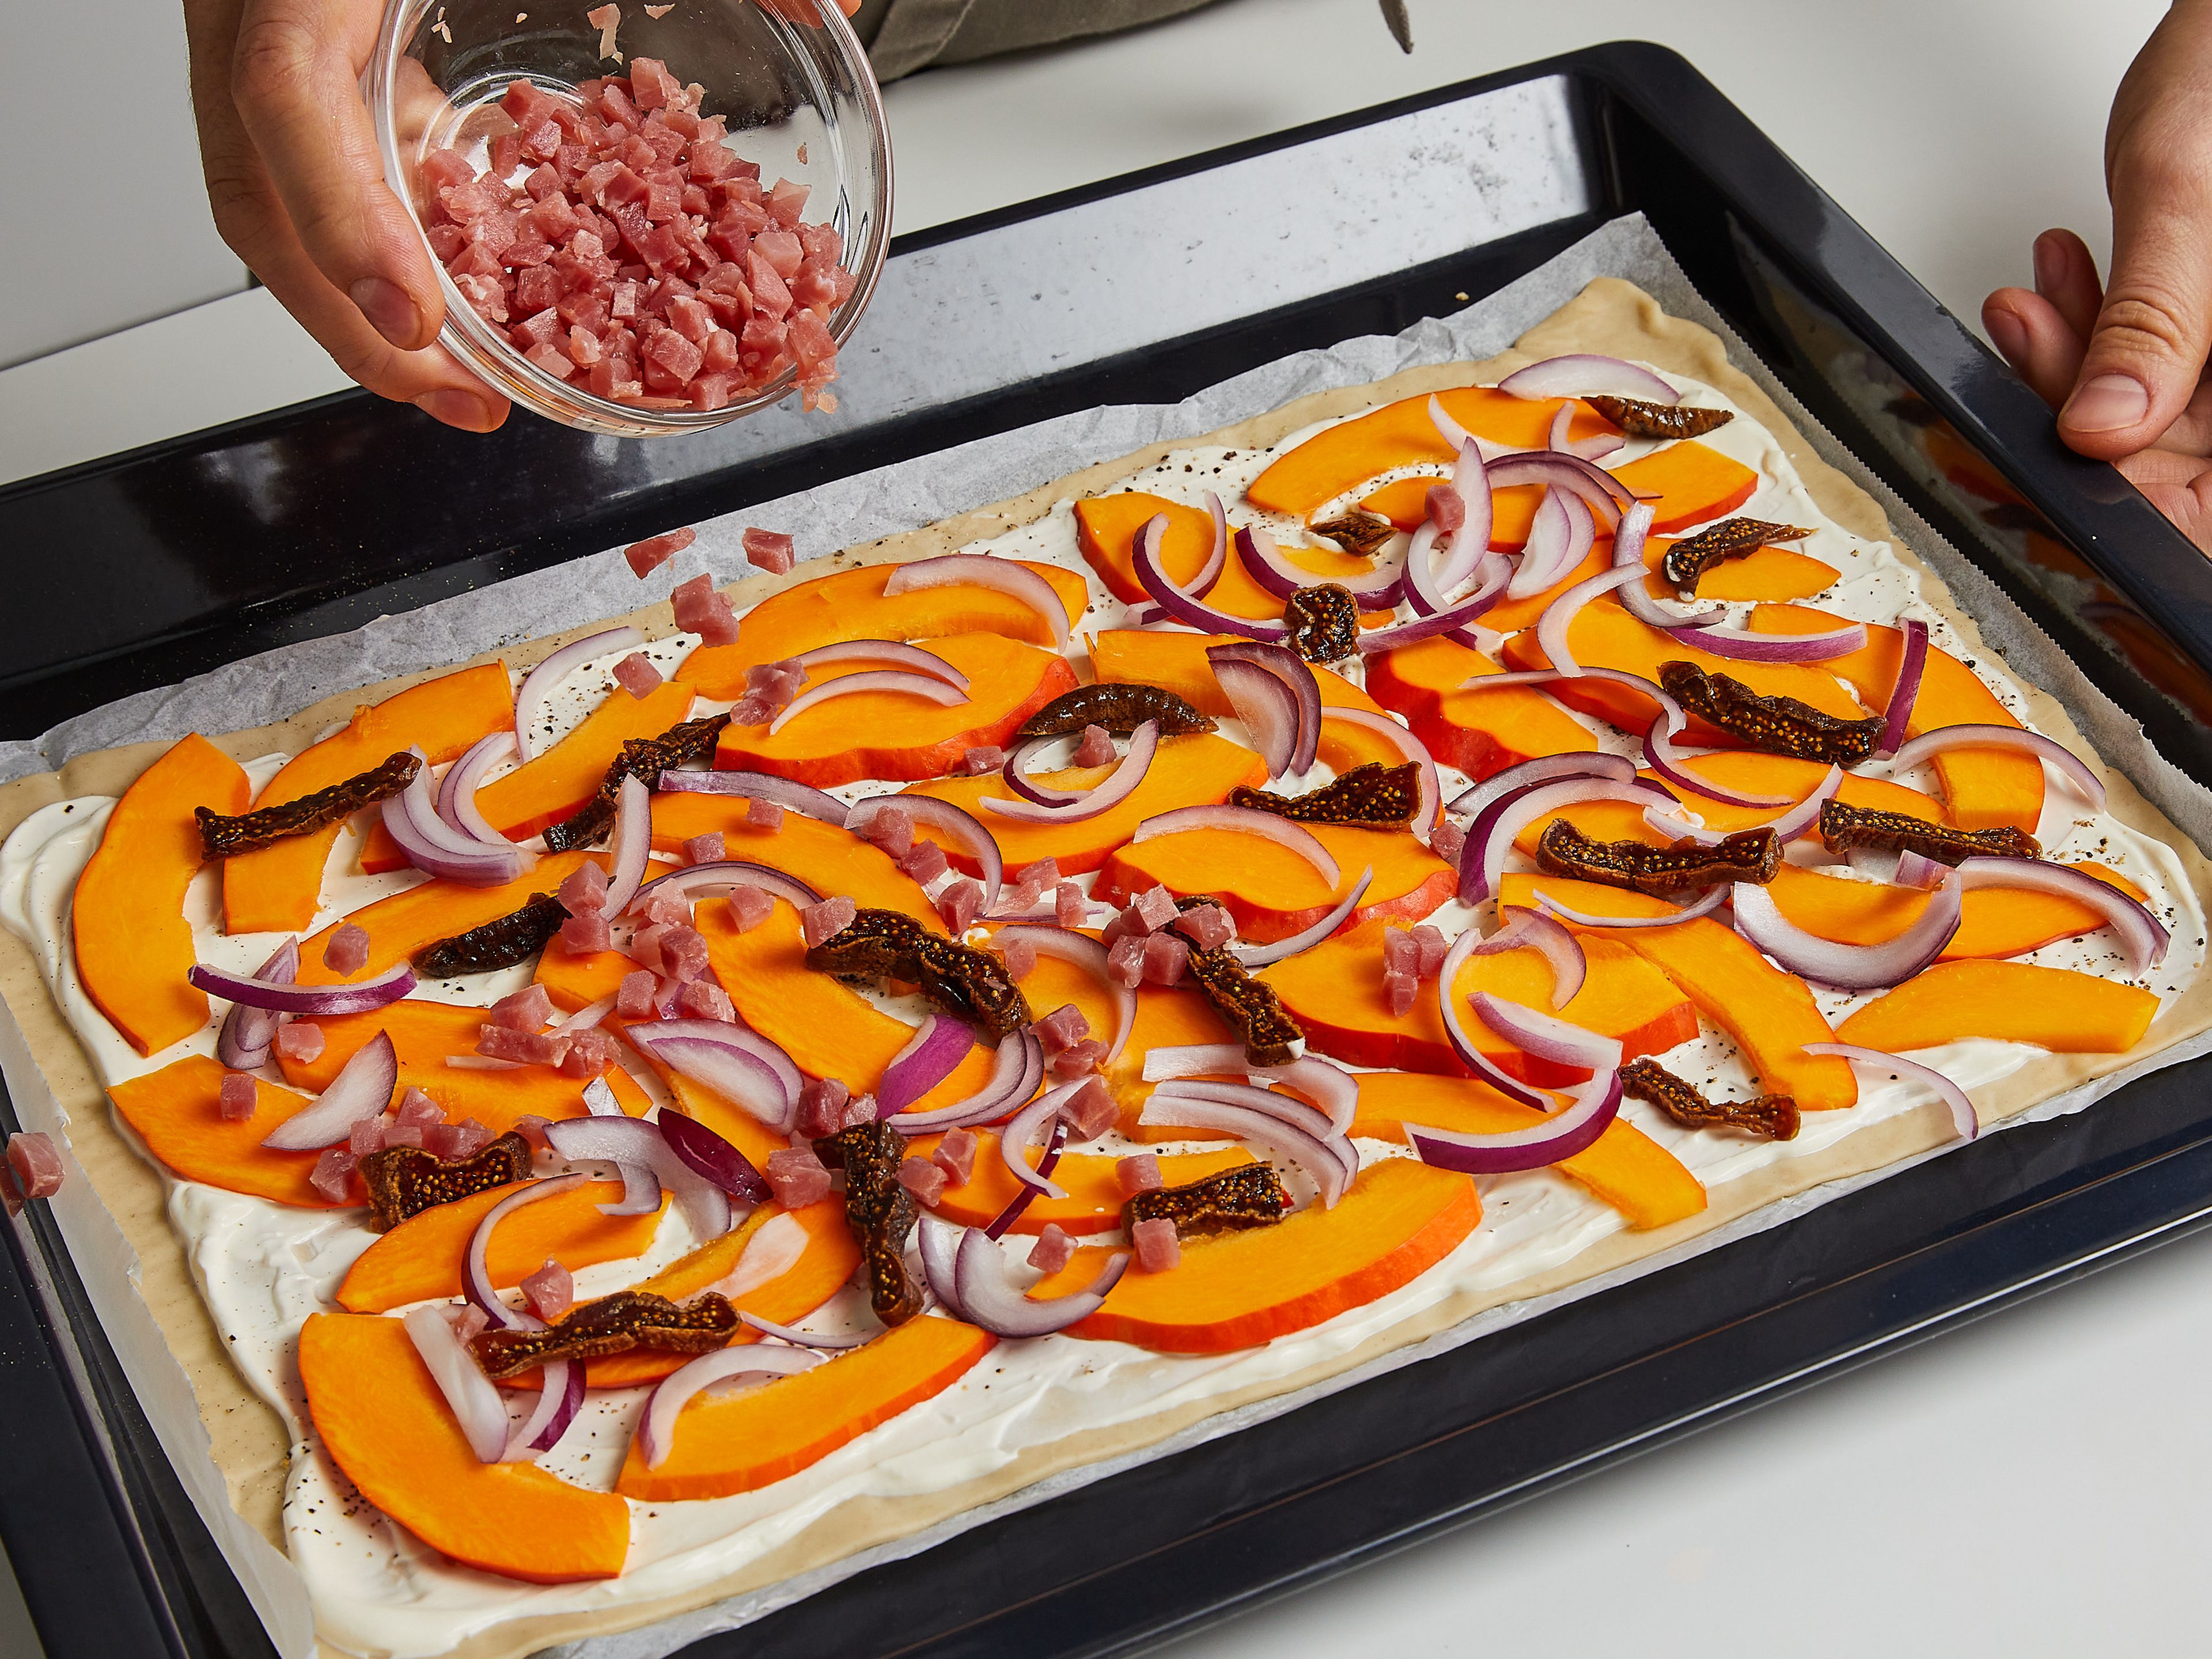 Spread the tarte flambée dough on a baking sheet lined with baking paper, spread with sour cream, leaving approx. 1 cm/ 0.4 in. border at the edge. Sprinkle sour cream with a little salt and pepper. Top tarte flambée with pumpkin strips, fig slices, onion strips and diced bacon.